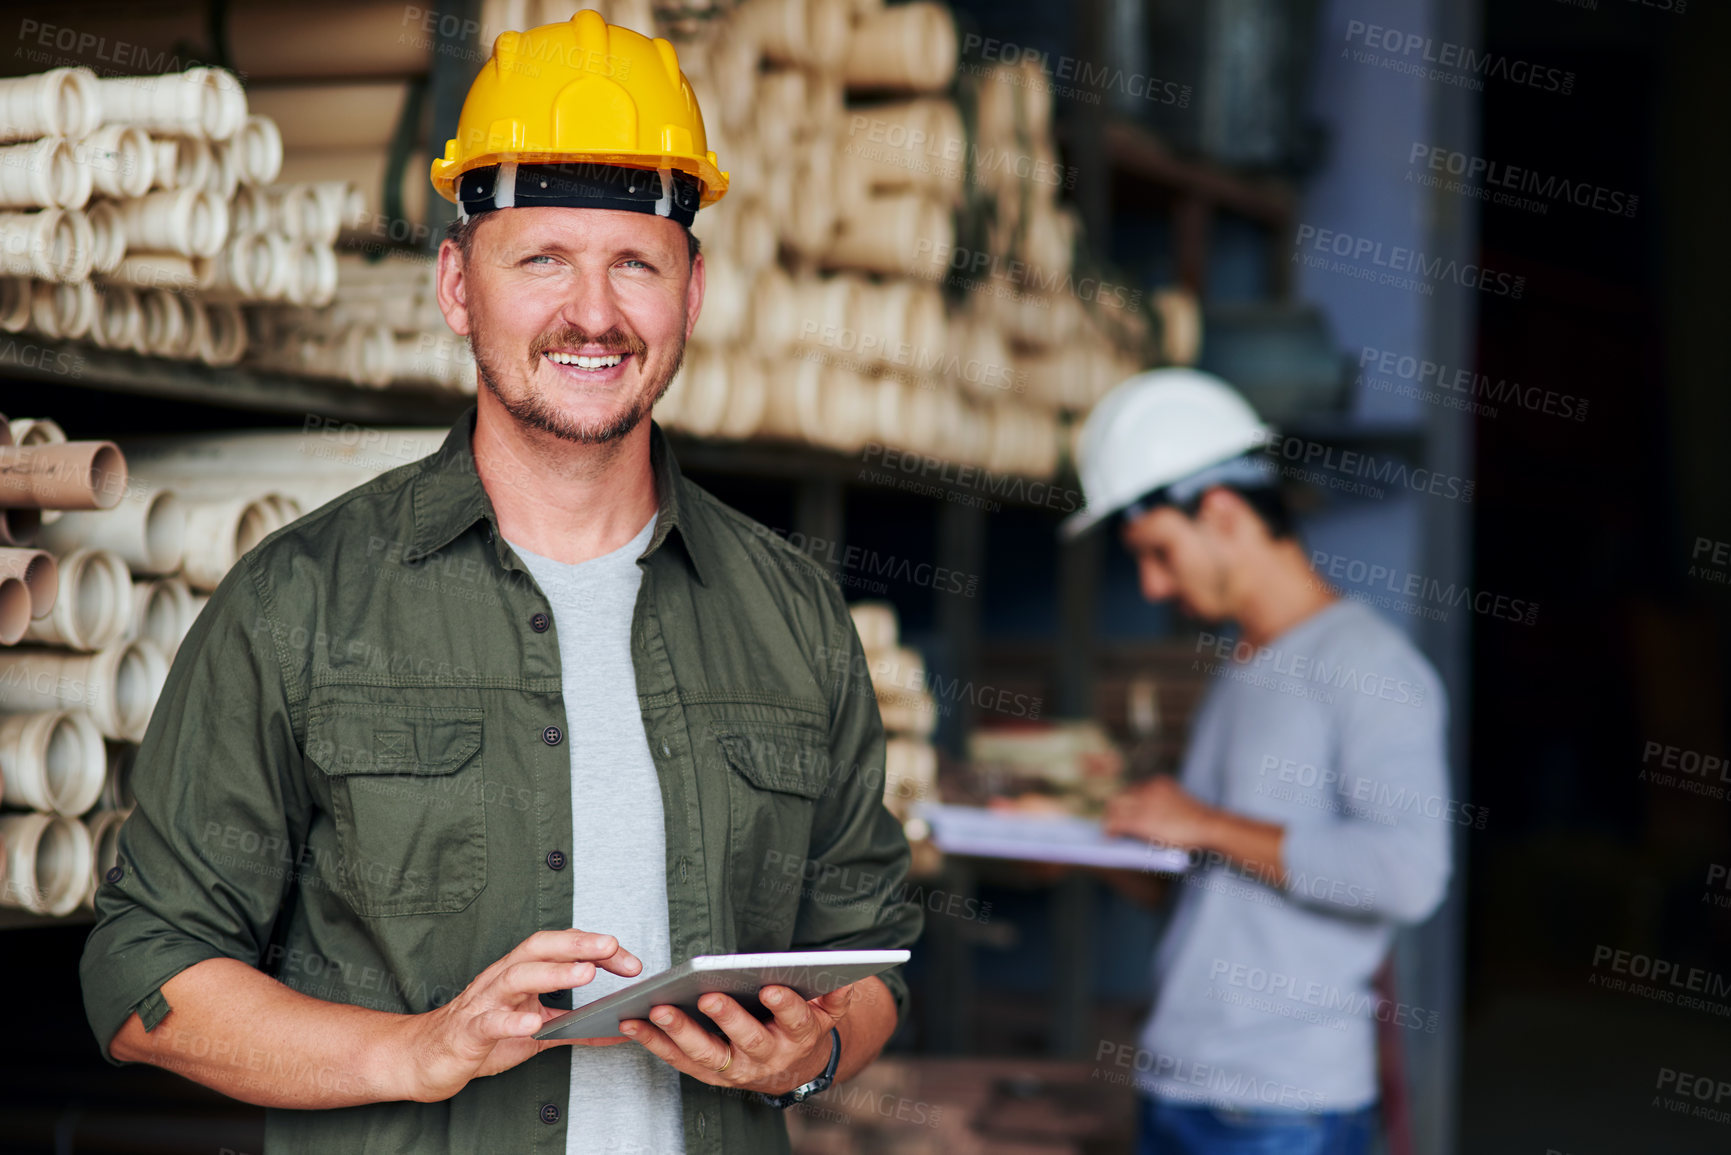 Buy stock photo Cropped portrait of a handsome mature construction worker using his tablet while standing in an industrial warehouse